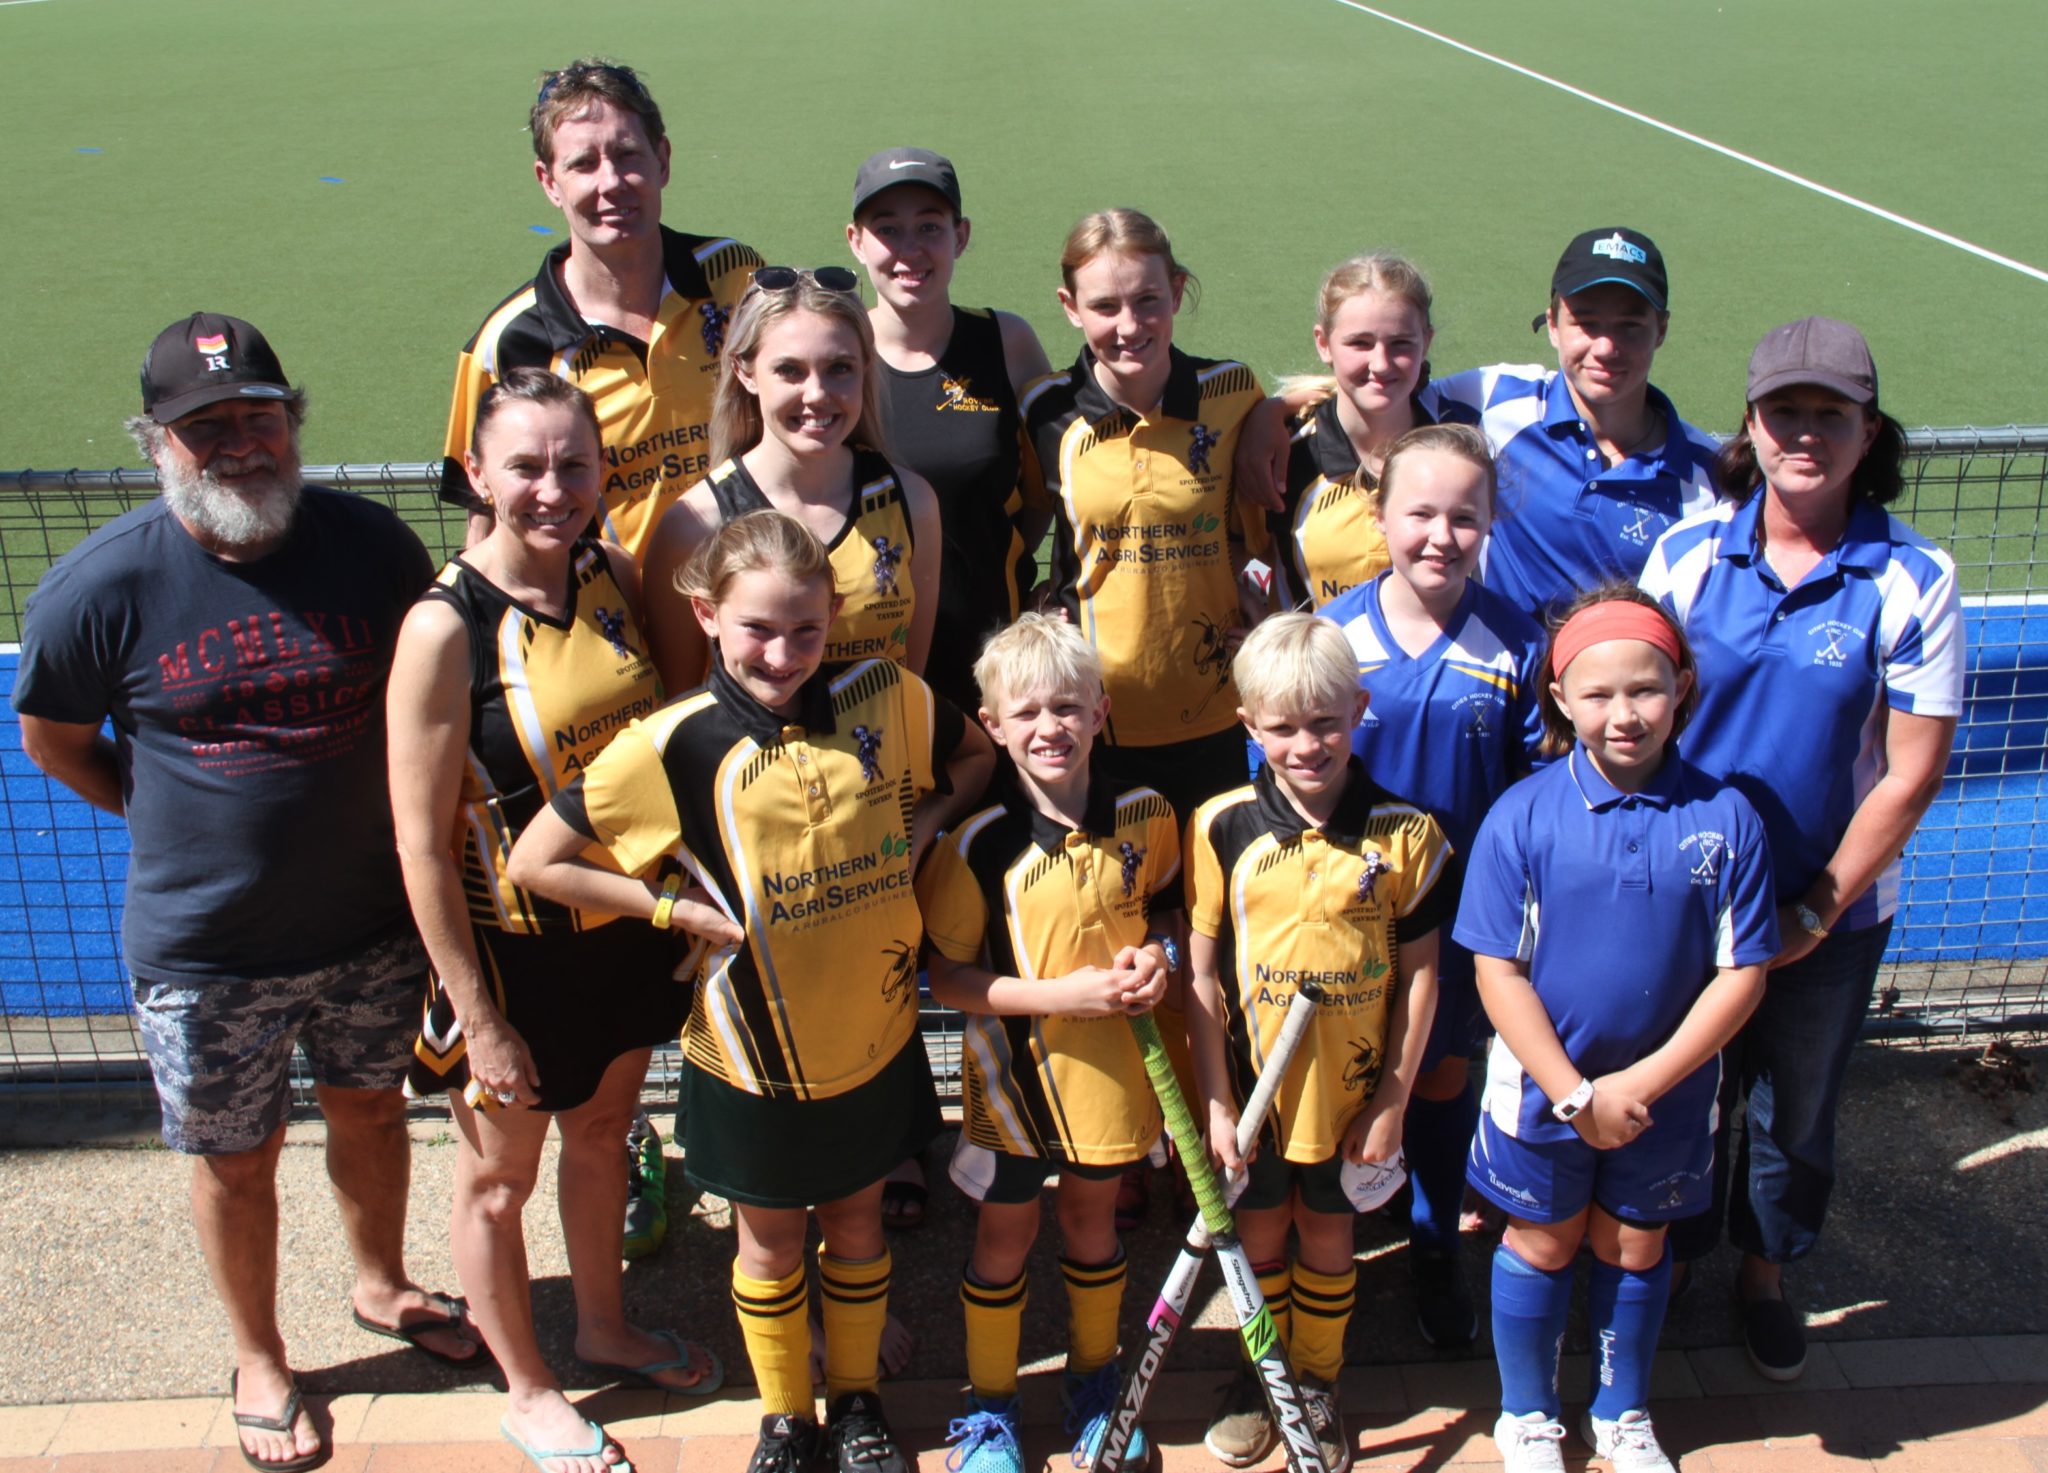 Aitkenhead and Kendall-Wightman families are a force in Bundaberg hockey – Back row (left to row) Dean, Reegan, Hailey, Emma, Sam, Liza; (Middle) Colin, Sue, Olivia, Gabby; (Front) Courtney, Beau, Levi and Sophie.